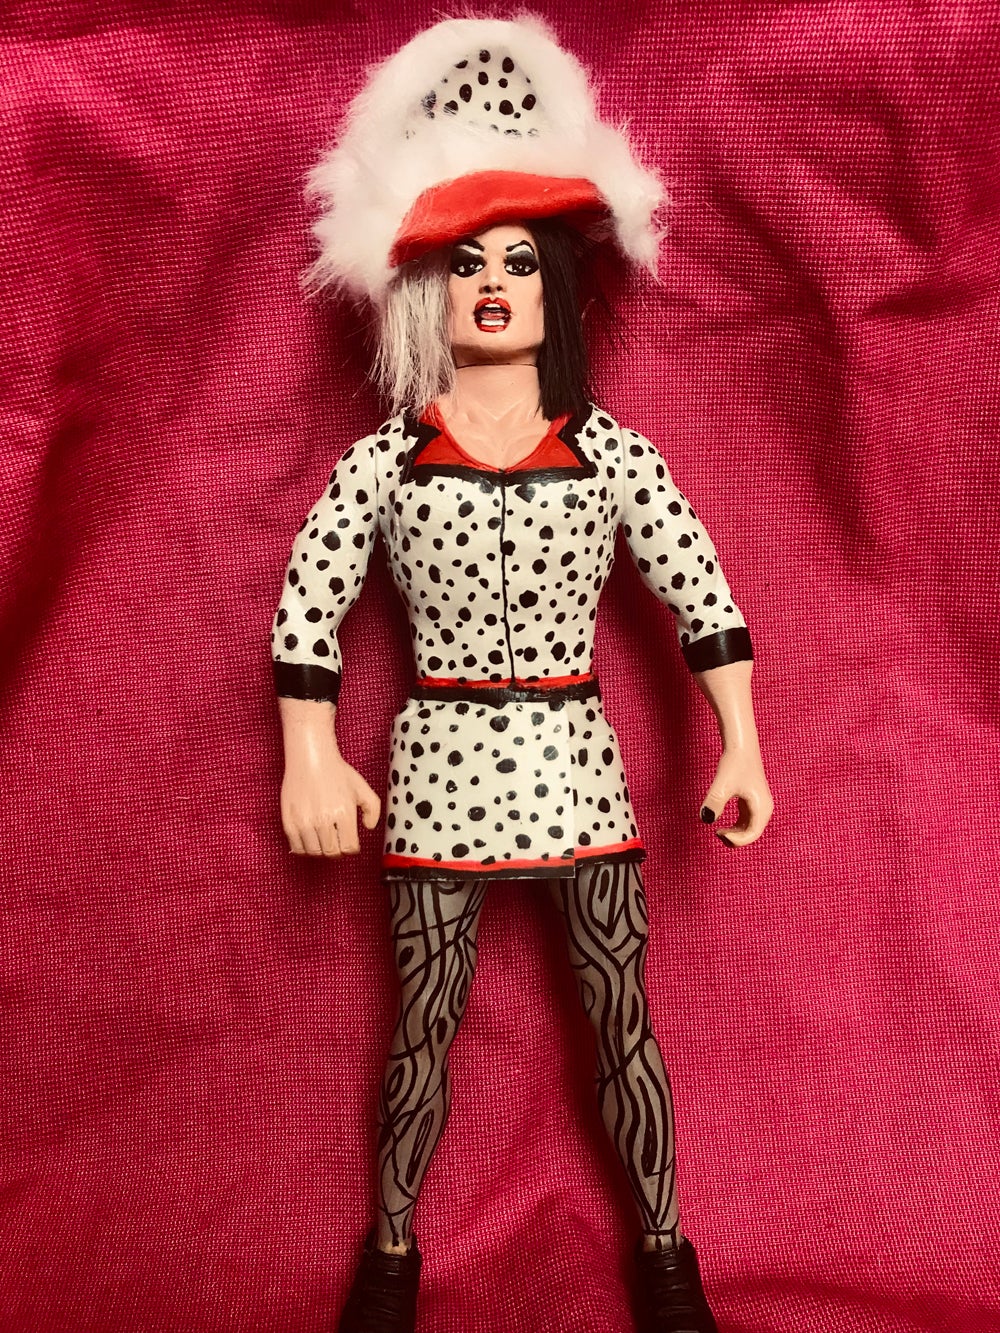 Lou’s Drag Queen Baga Chips doll (Collect/PA Real Life)